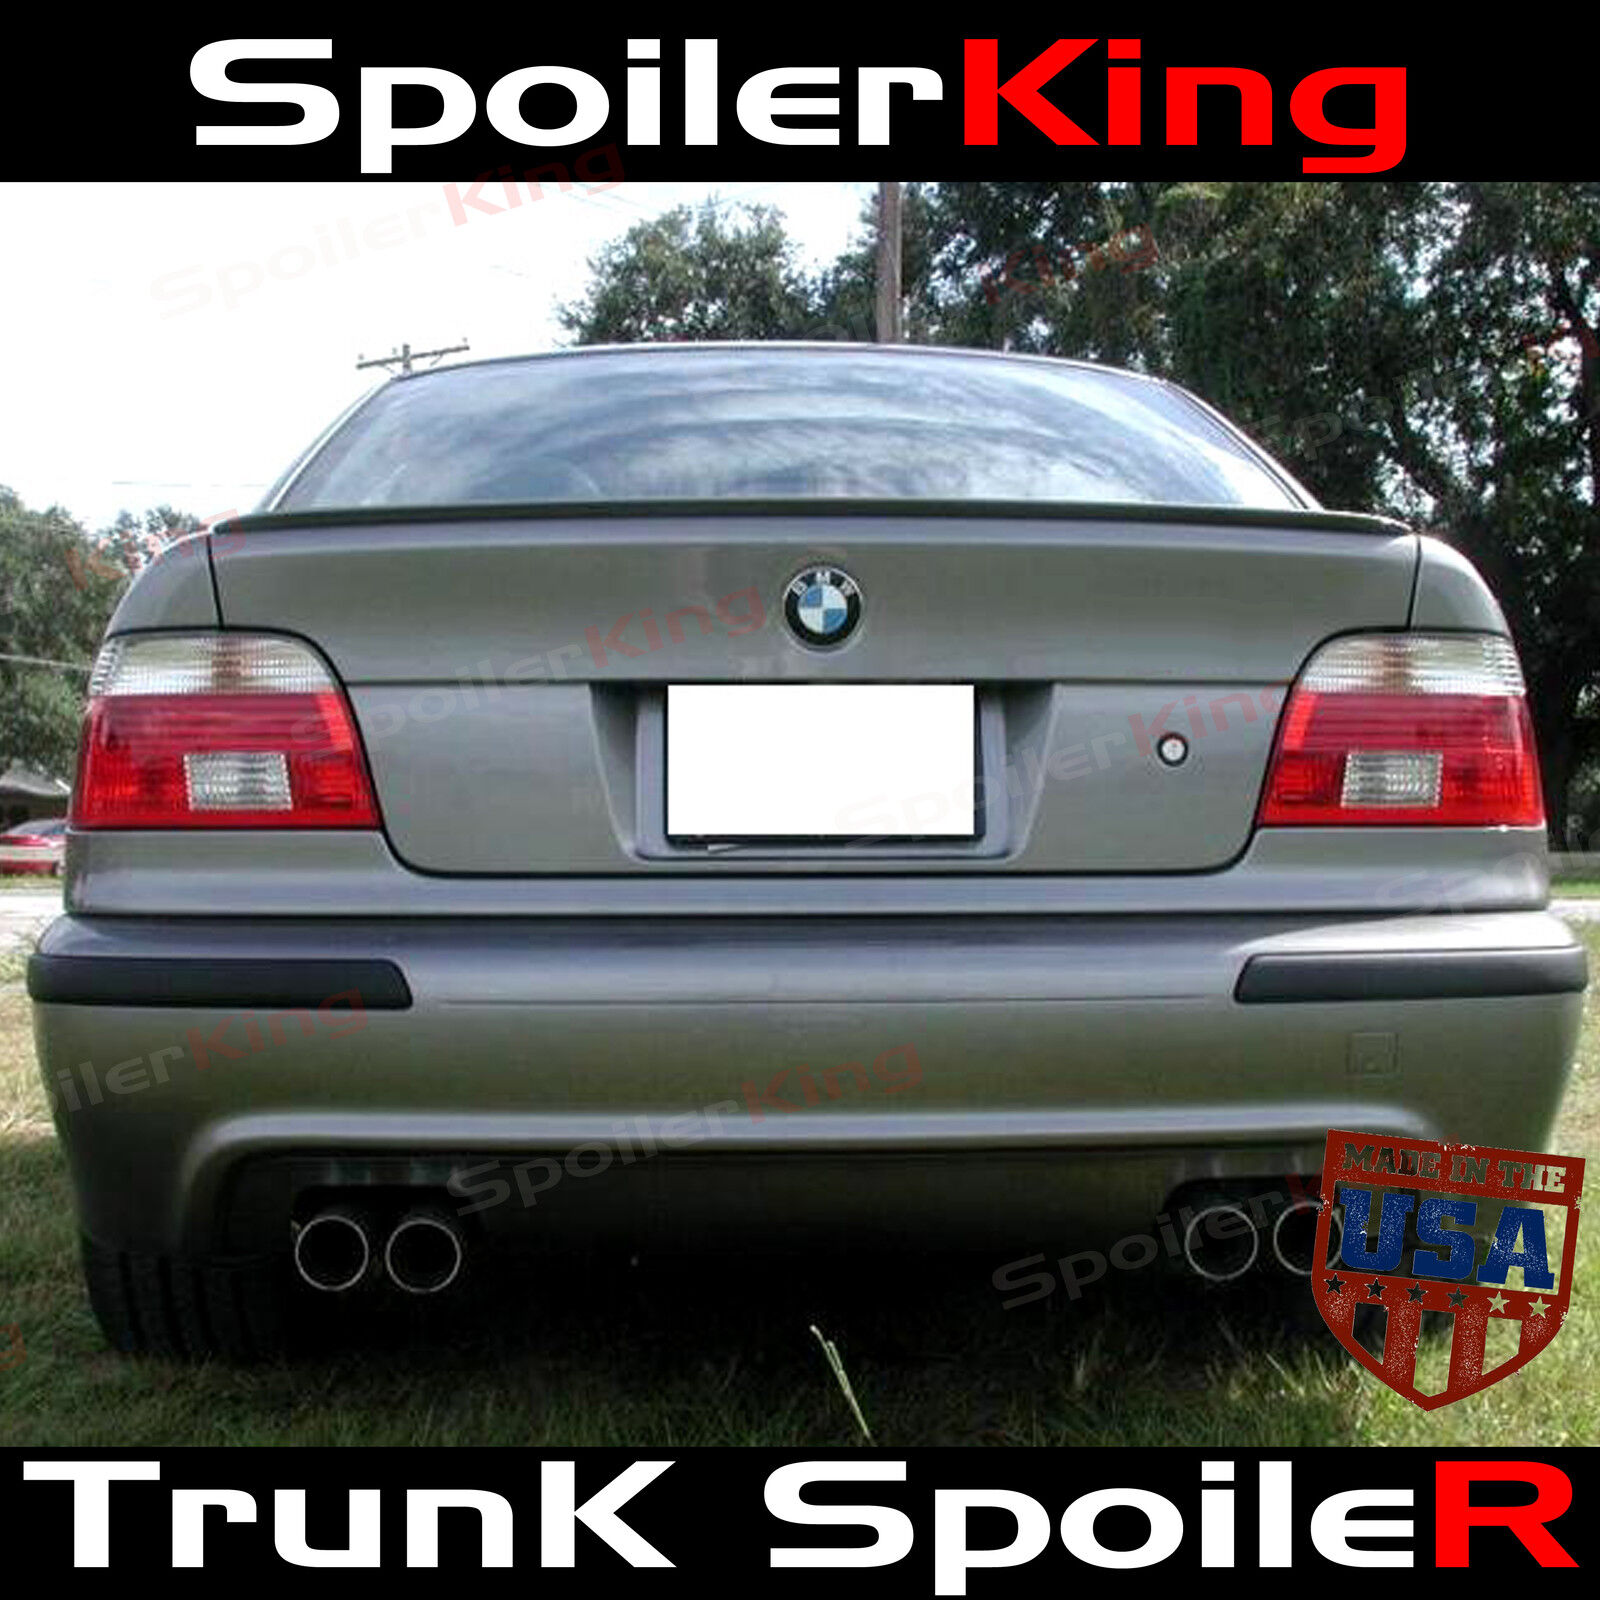 (244L) M style trunk spoiler fits: E39 1997-2003 5 series BMW Rear trunk M5 wing